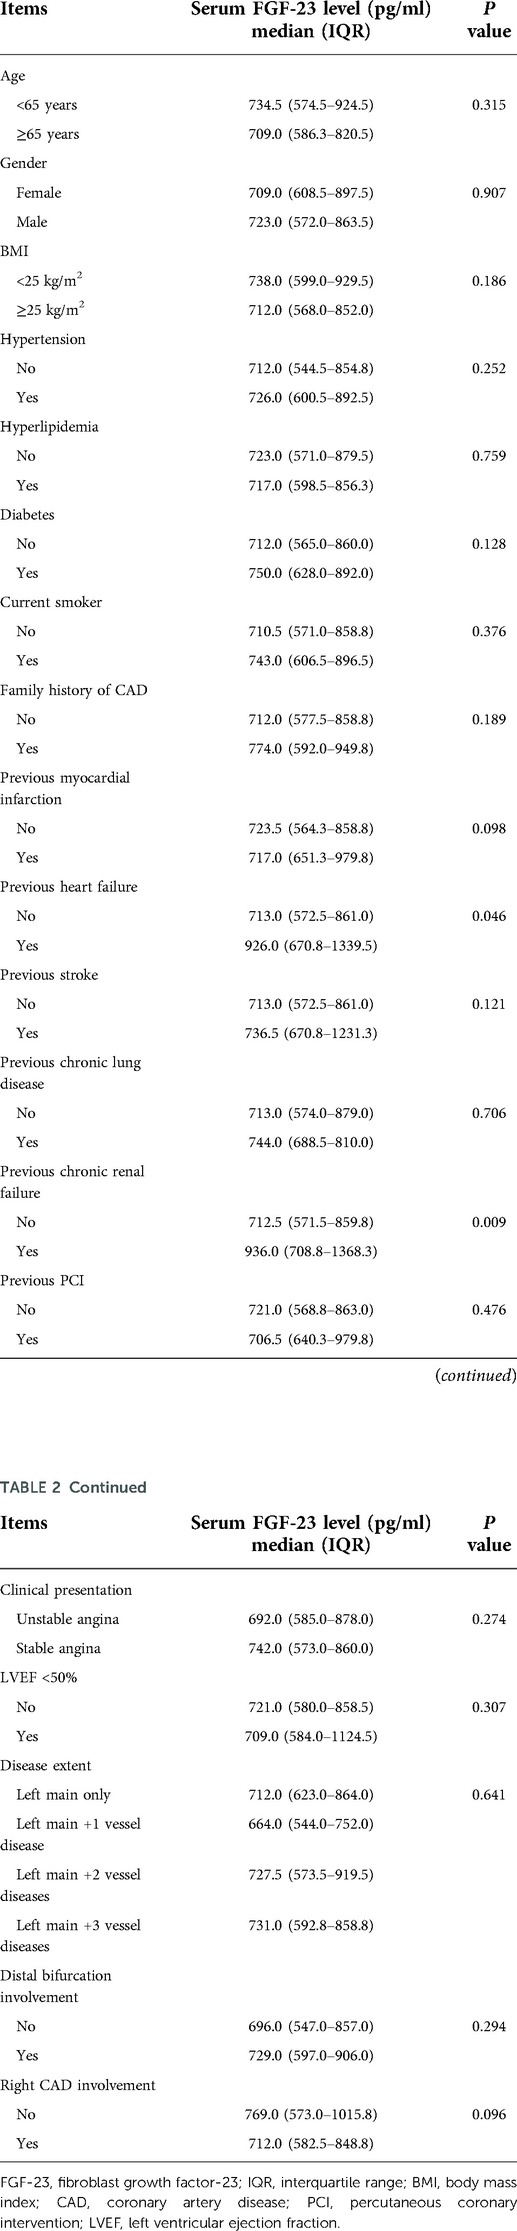 Frontiers | Perioperative variation in serum FGF-23 level and its ...